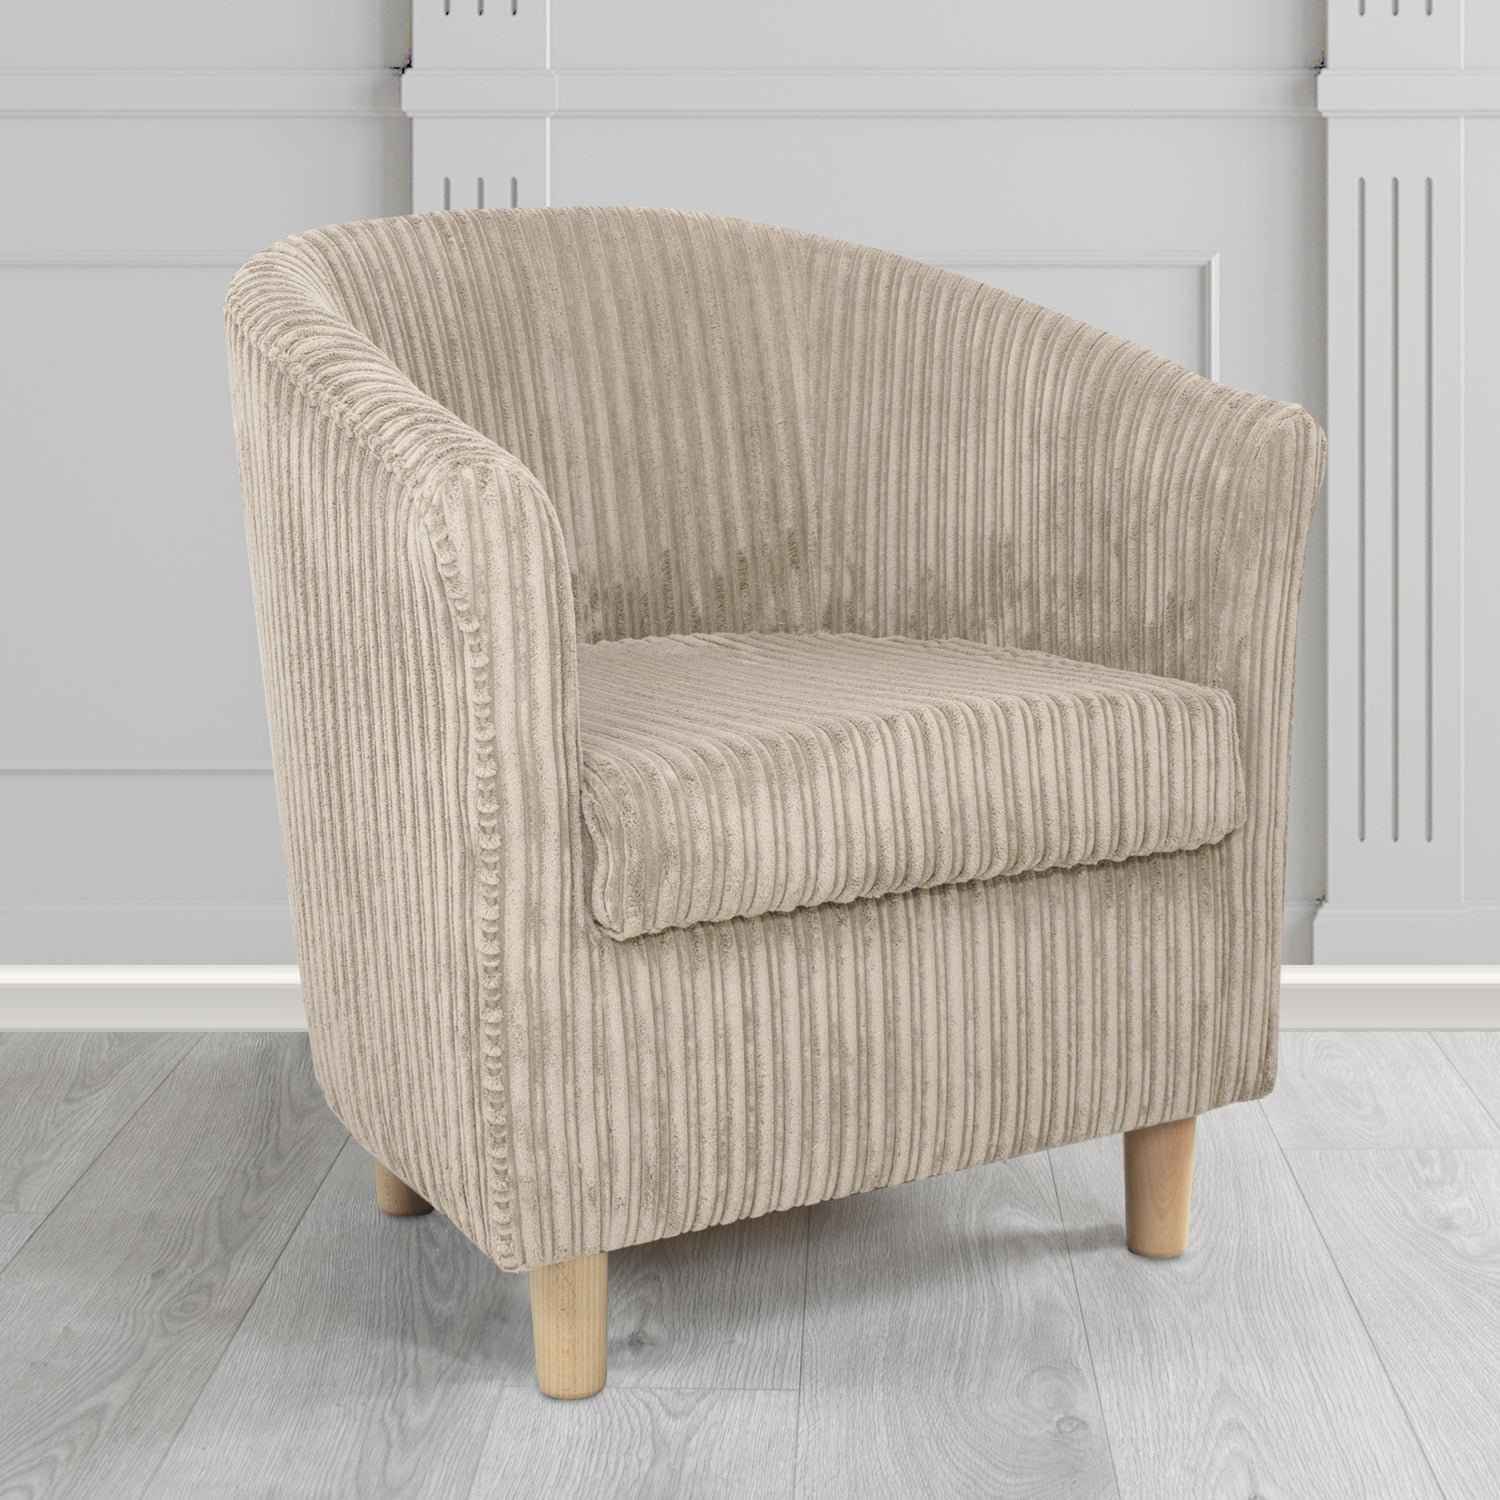 Tuscany in Conway Mink Plain Textured Fabric Tub Chair (6581732474922)